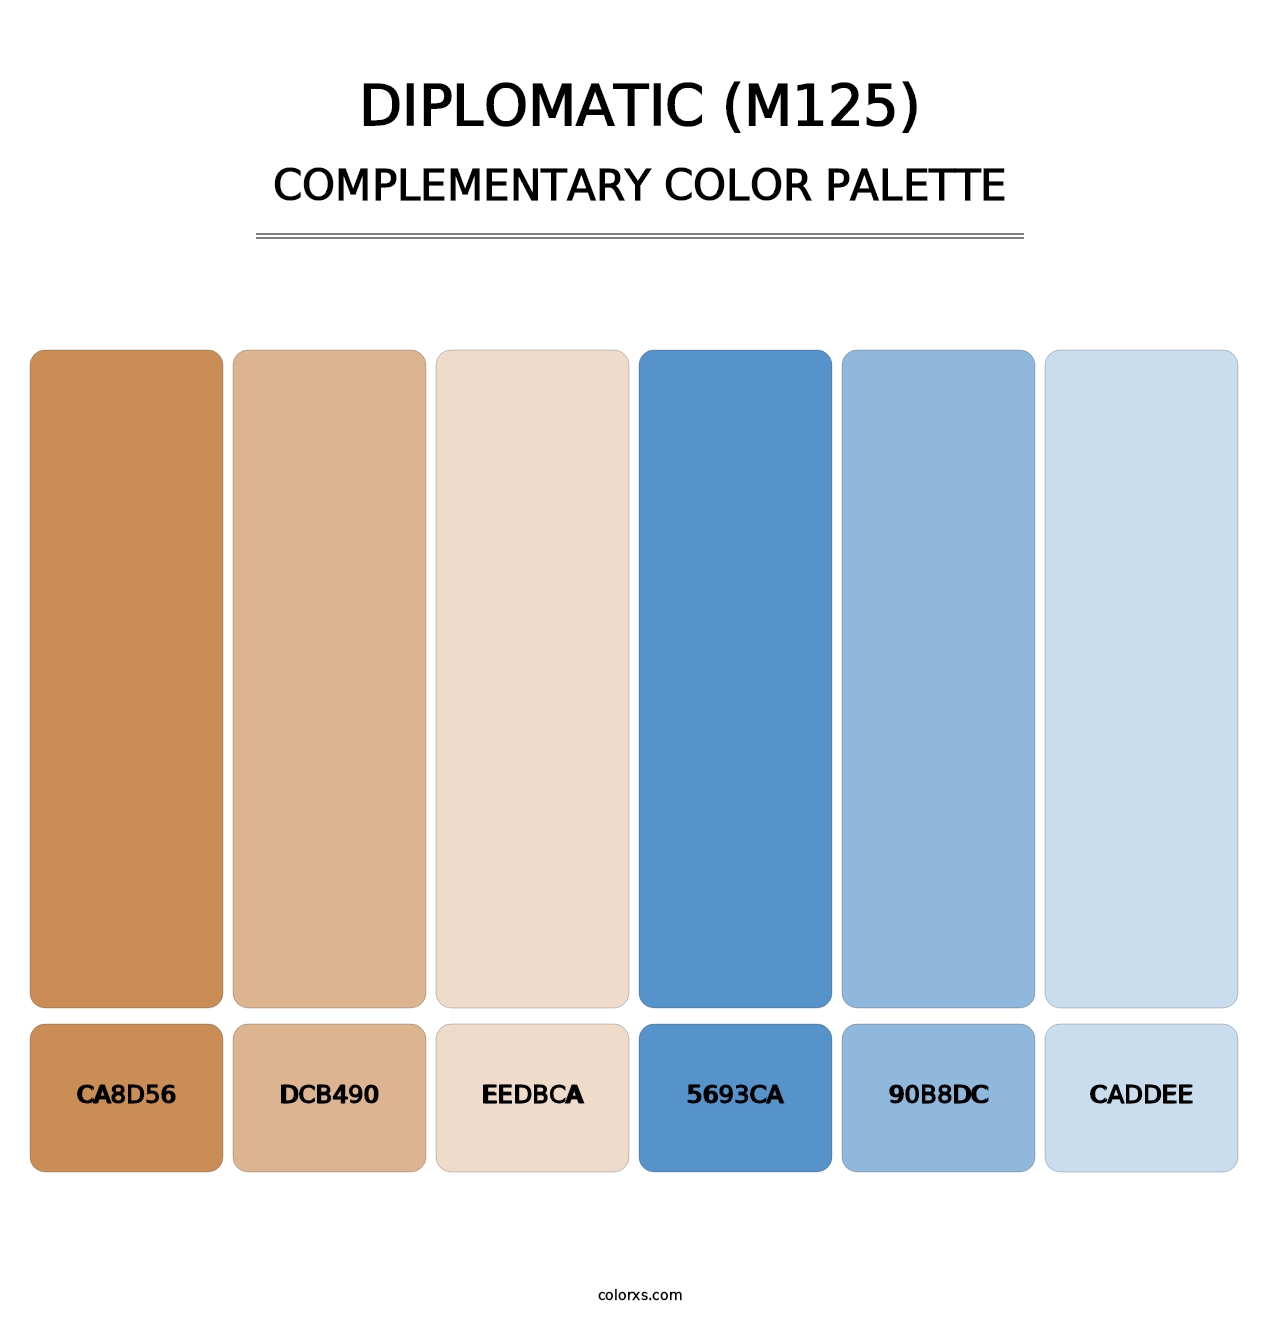 Diplomatic (M125) - Complementary Color Palette